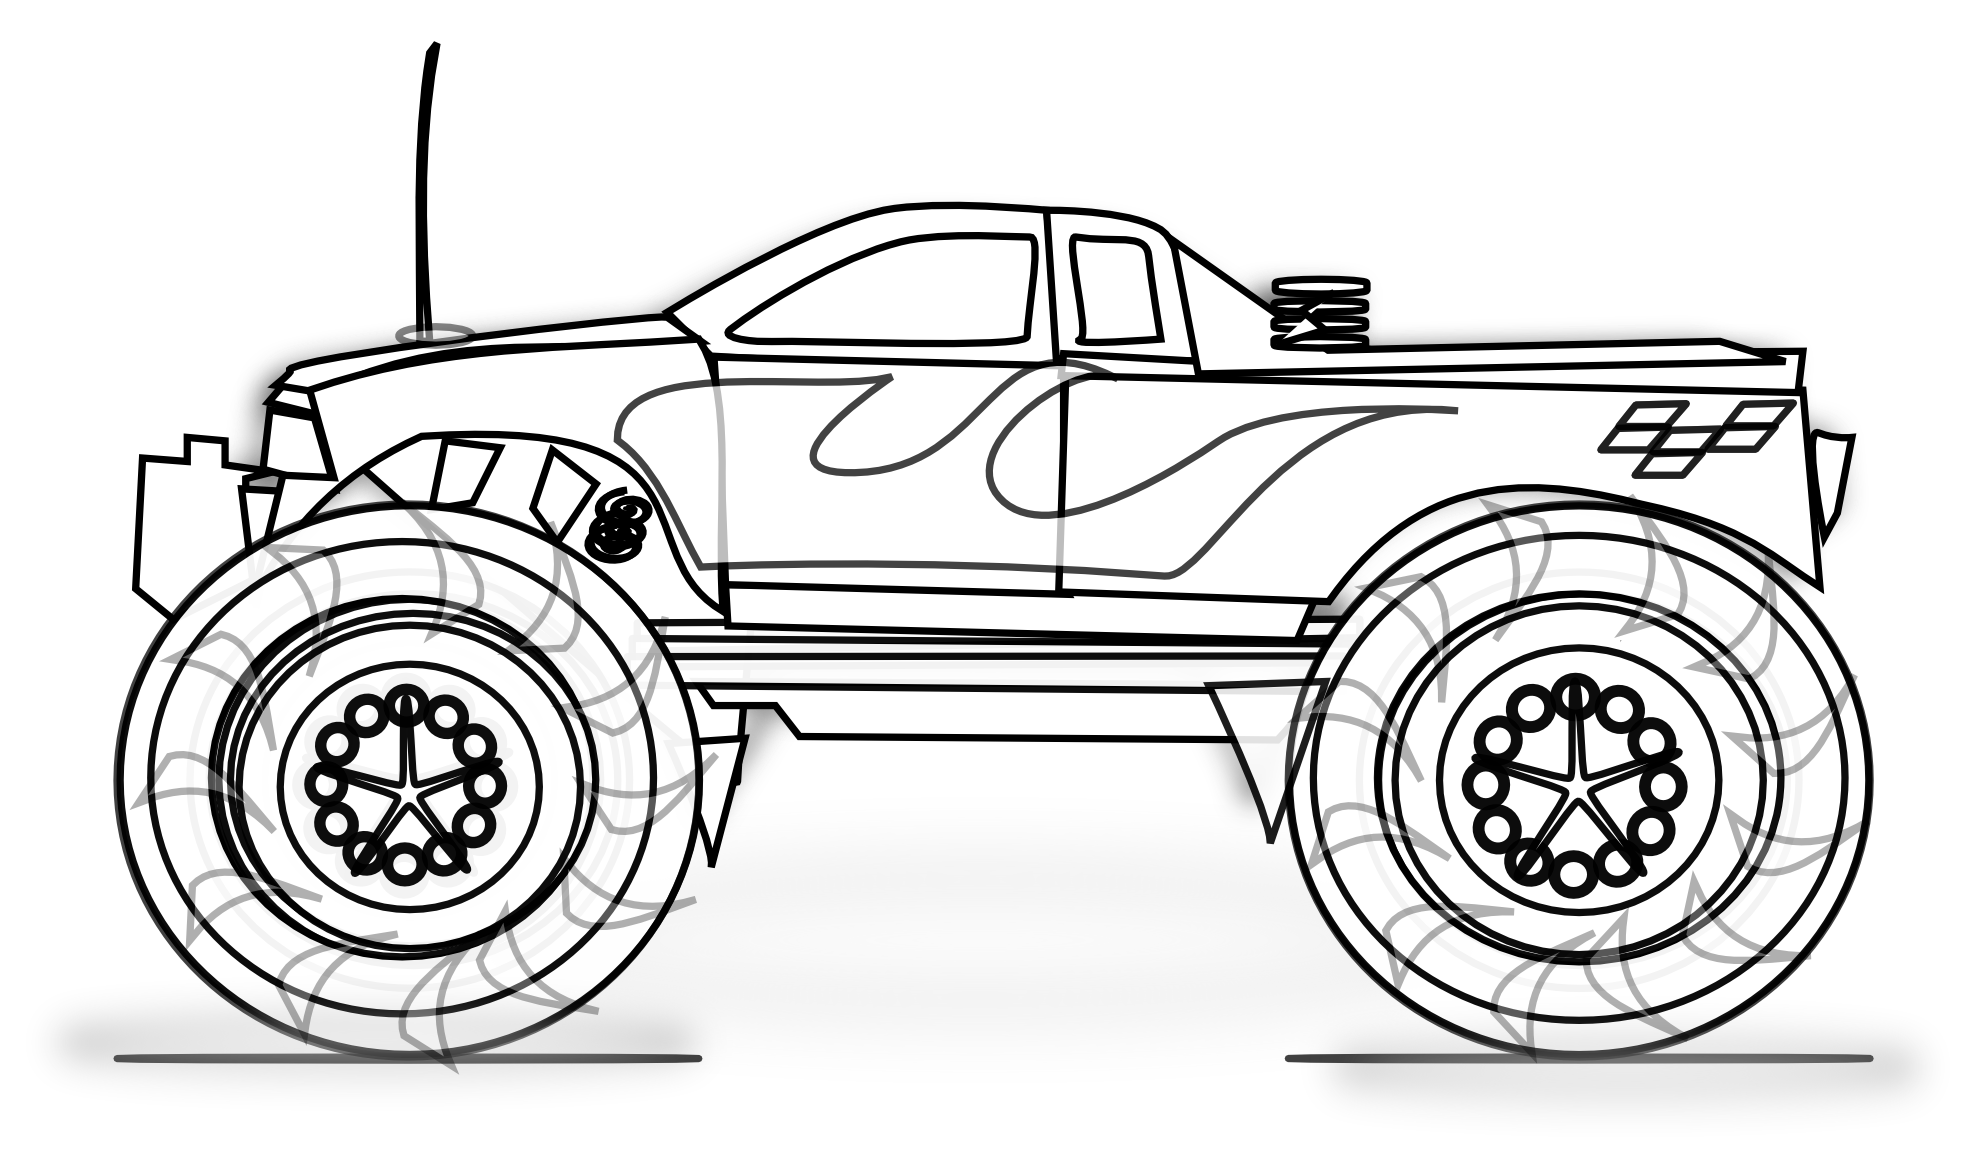 Truck coloring pages | color printing | coloring sheets | #65 Free